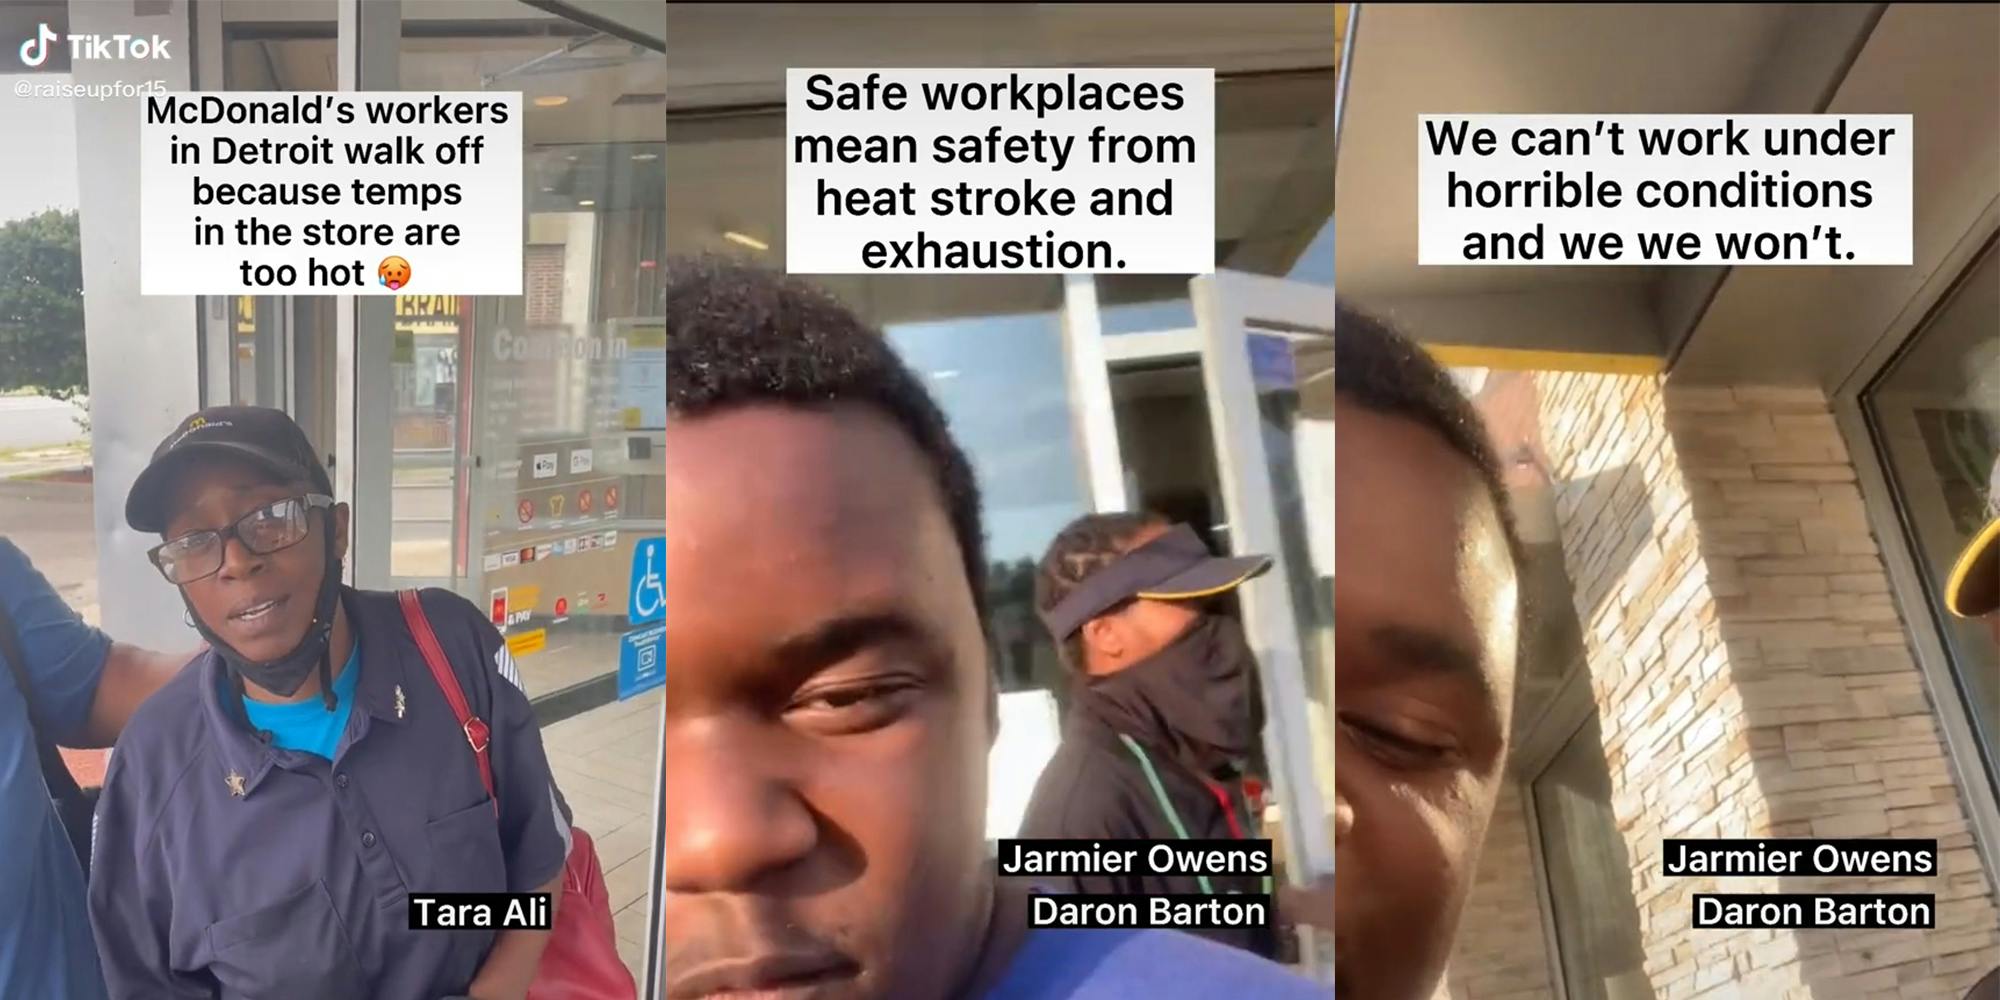 Woman leaving McDonald's with caption "McDonald's workers in Detroit walk off because temps in the store are too hot" (l) Two men leaving store with caption "Safe workplaces mean safety from heat stroke and exhaustion." (c) man outside McDonald's with caption "We can't work under horrible conditions and we we won't". (r)